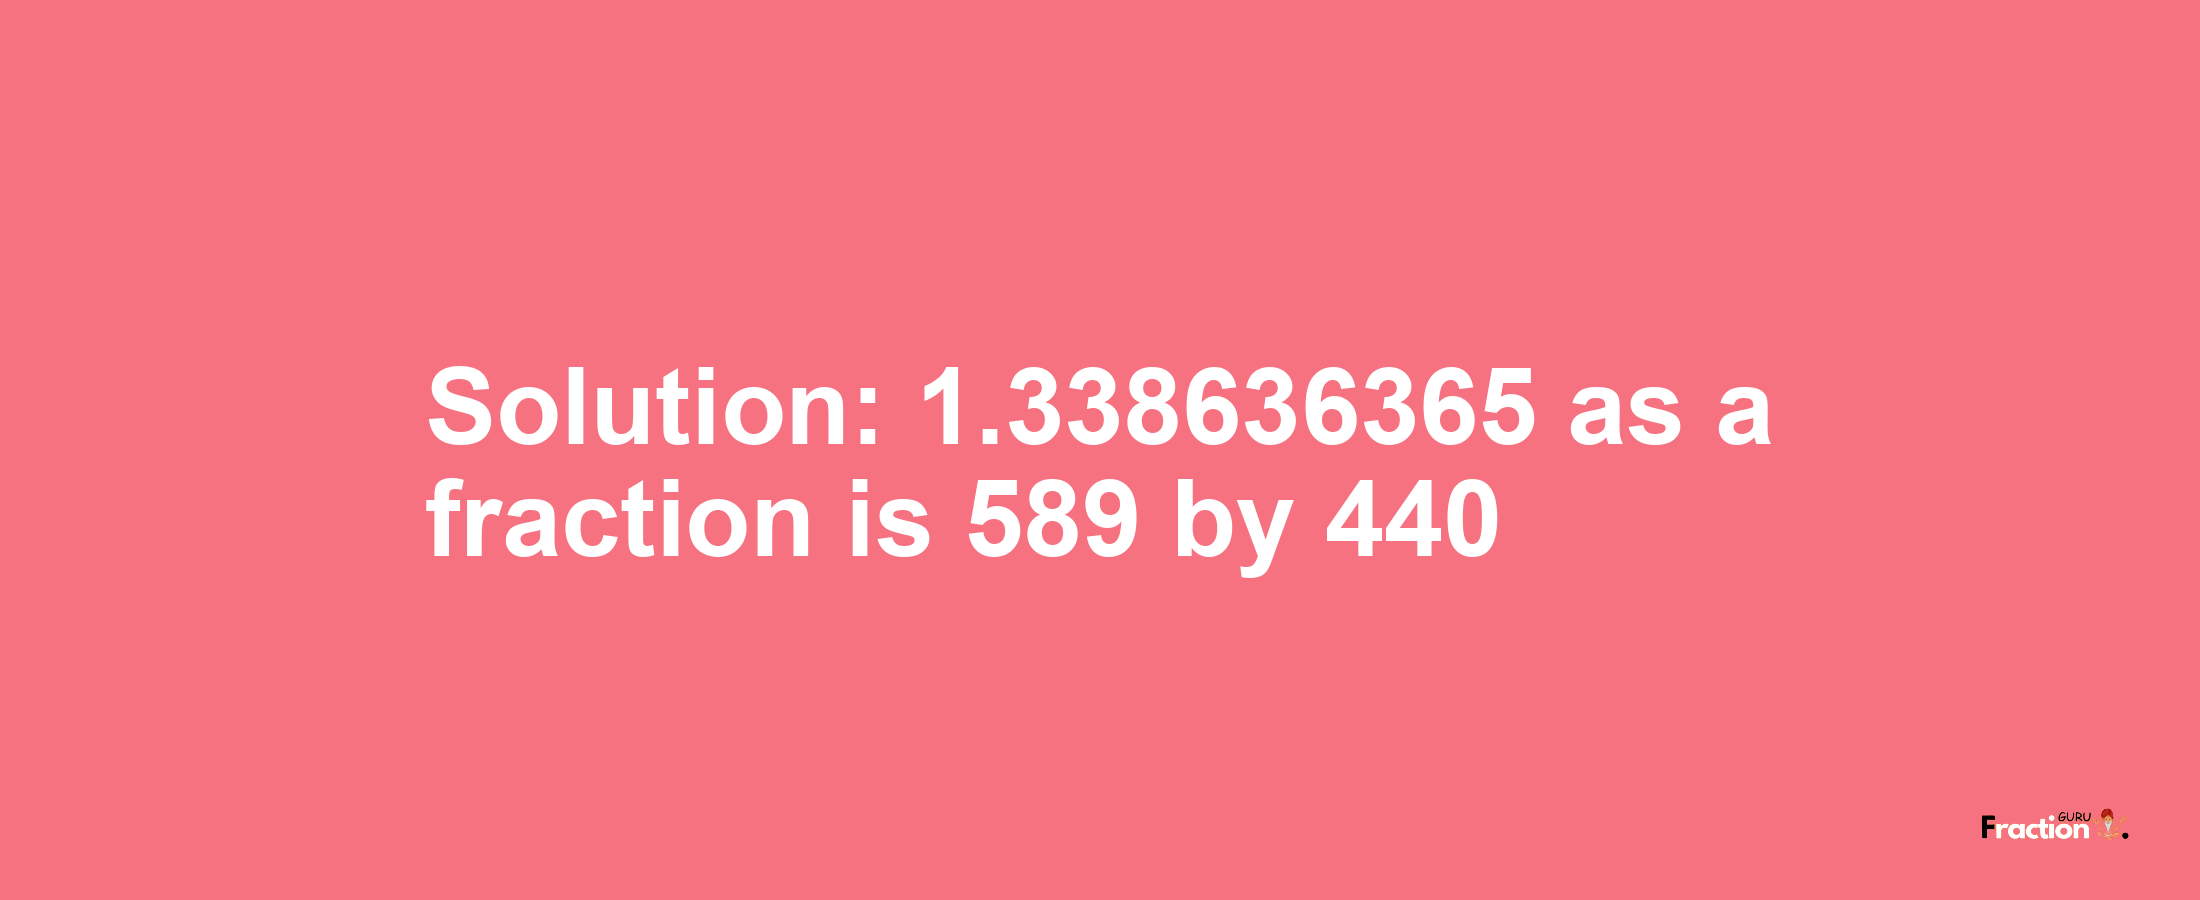 Solution:1.338636365 as a fraction is 589/440